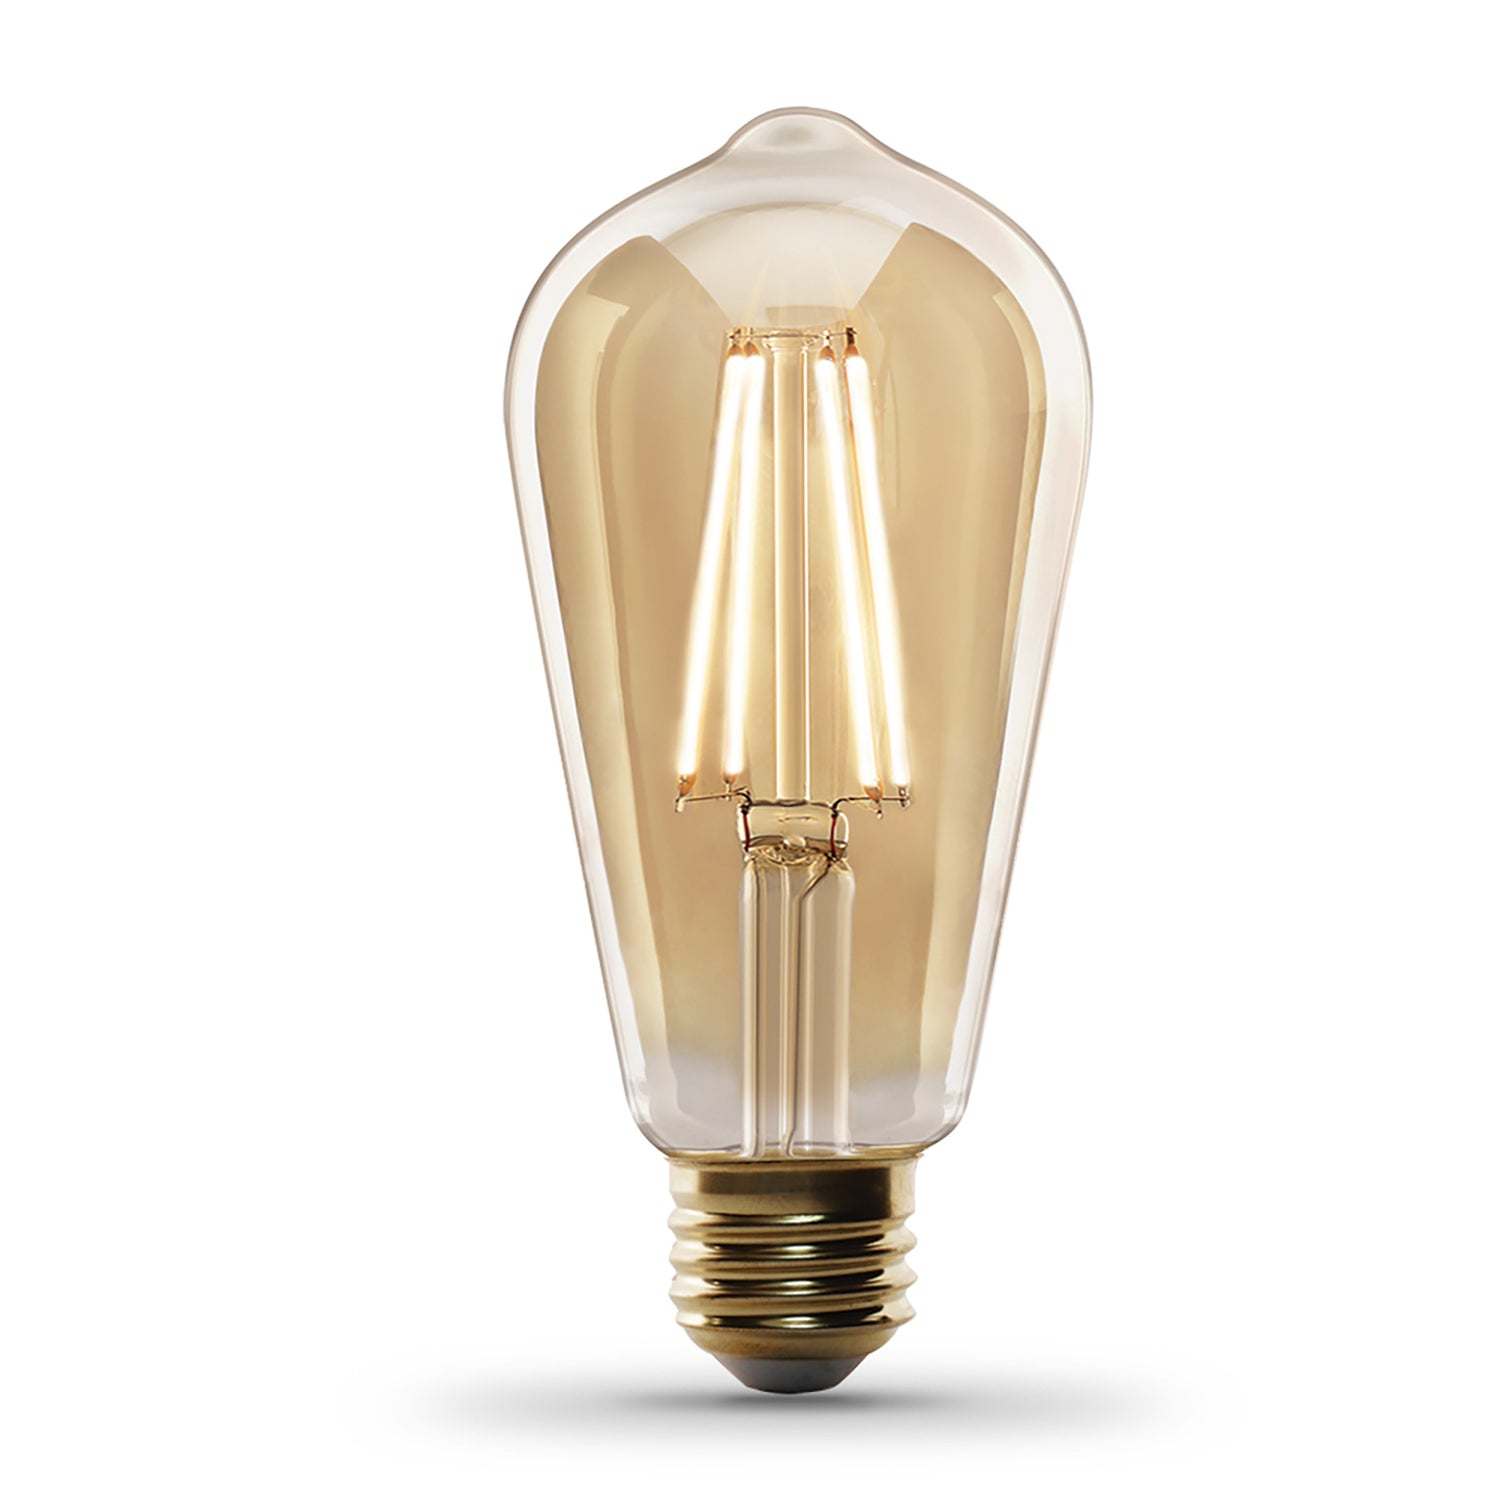 5.5W (60W Replacement) ST19 E26 Dimmable Straight Filament Amber Glass Vintage Edison LED Light Bulb, Warm Light (4-Pack)